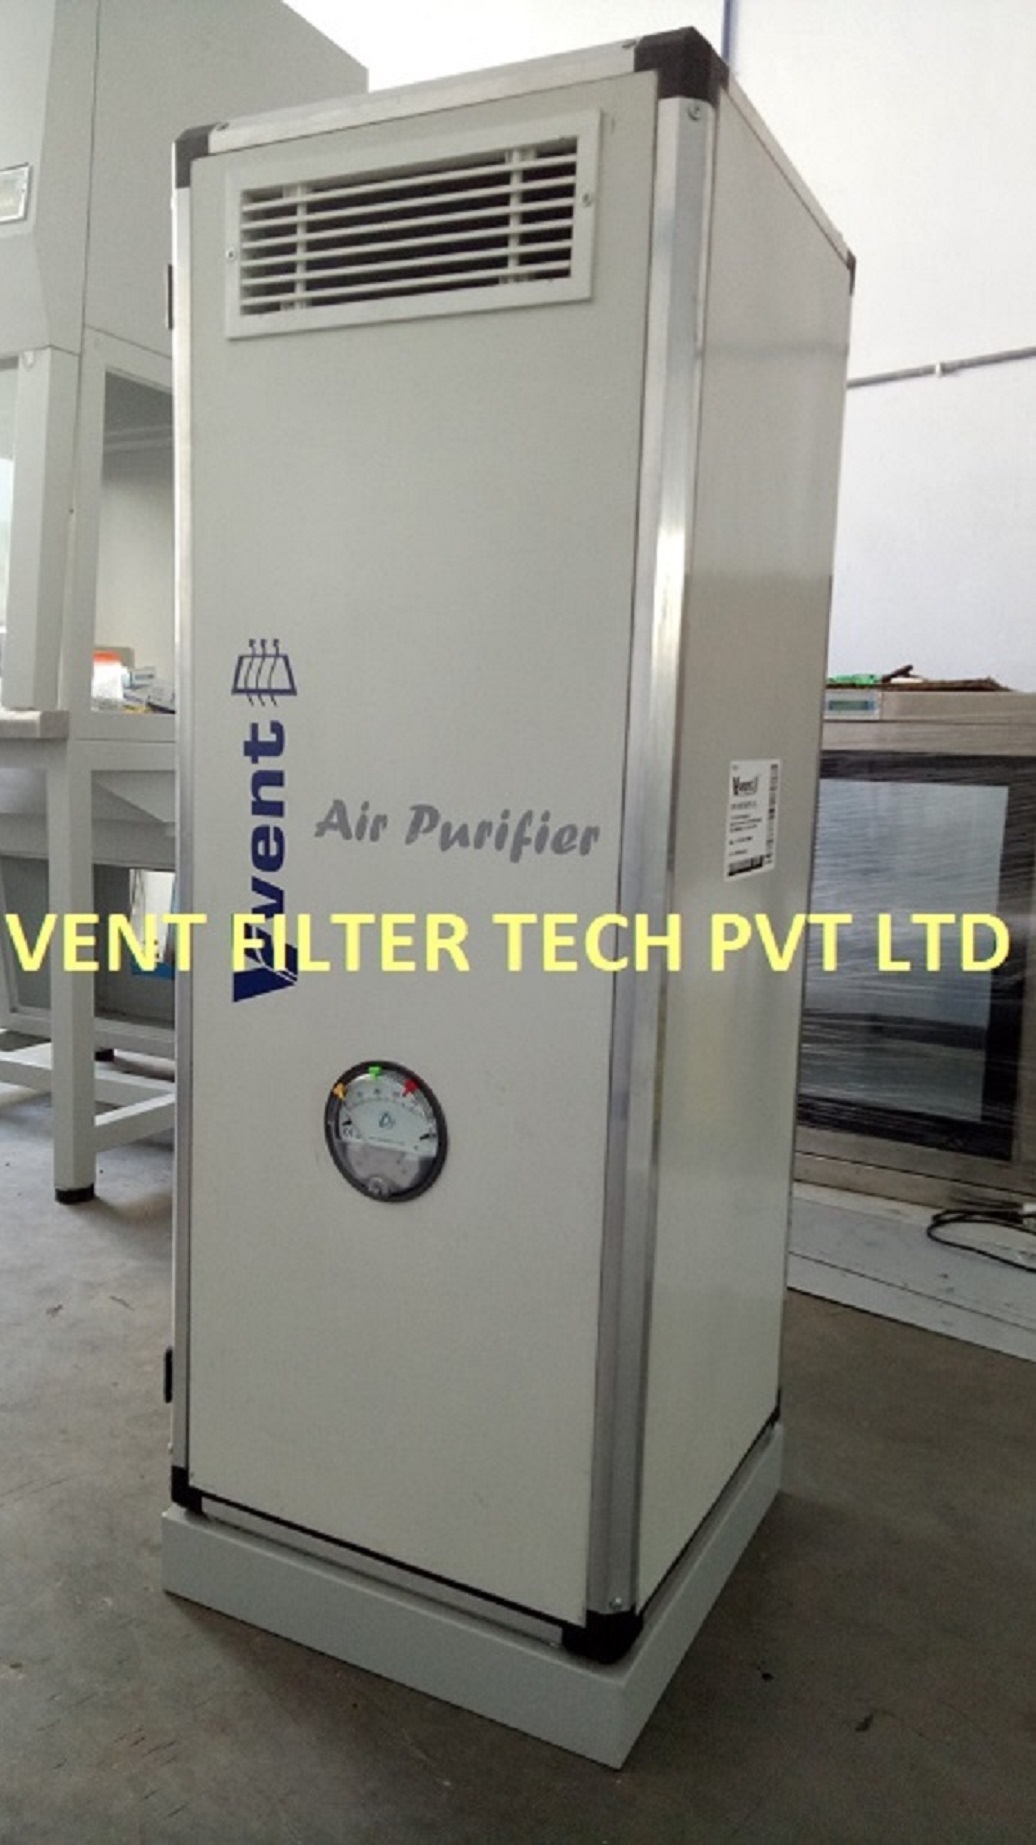 Air Purification system